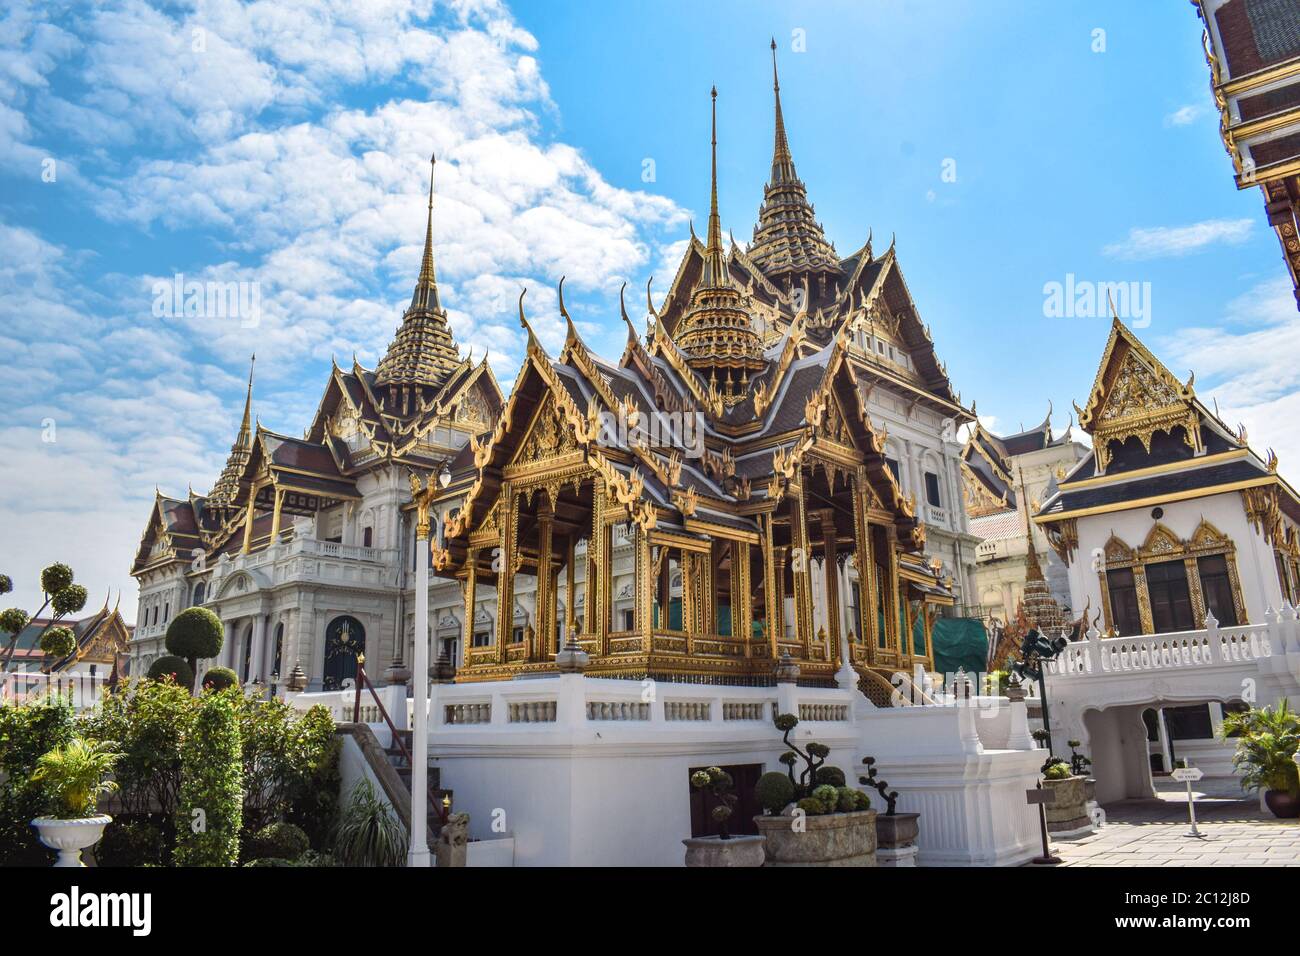 The beautiful decorated golden Grand Palace in Bangkok Thailand Stock Photo